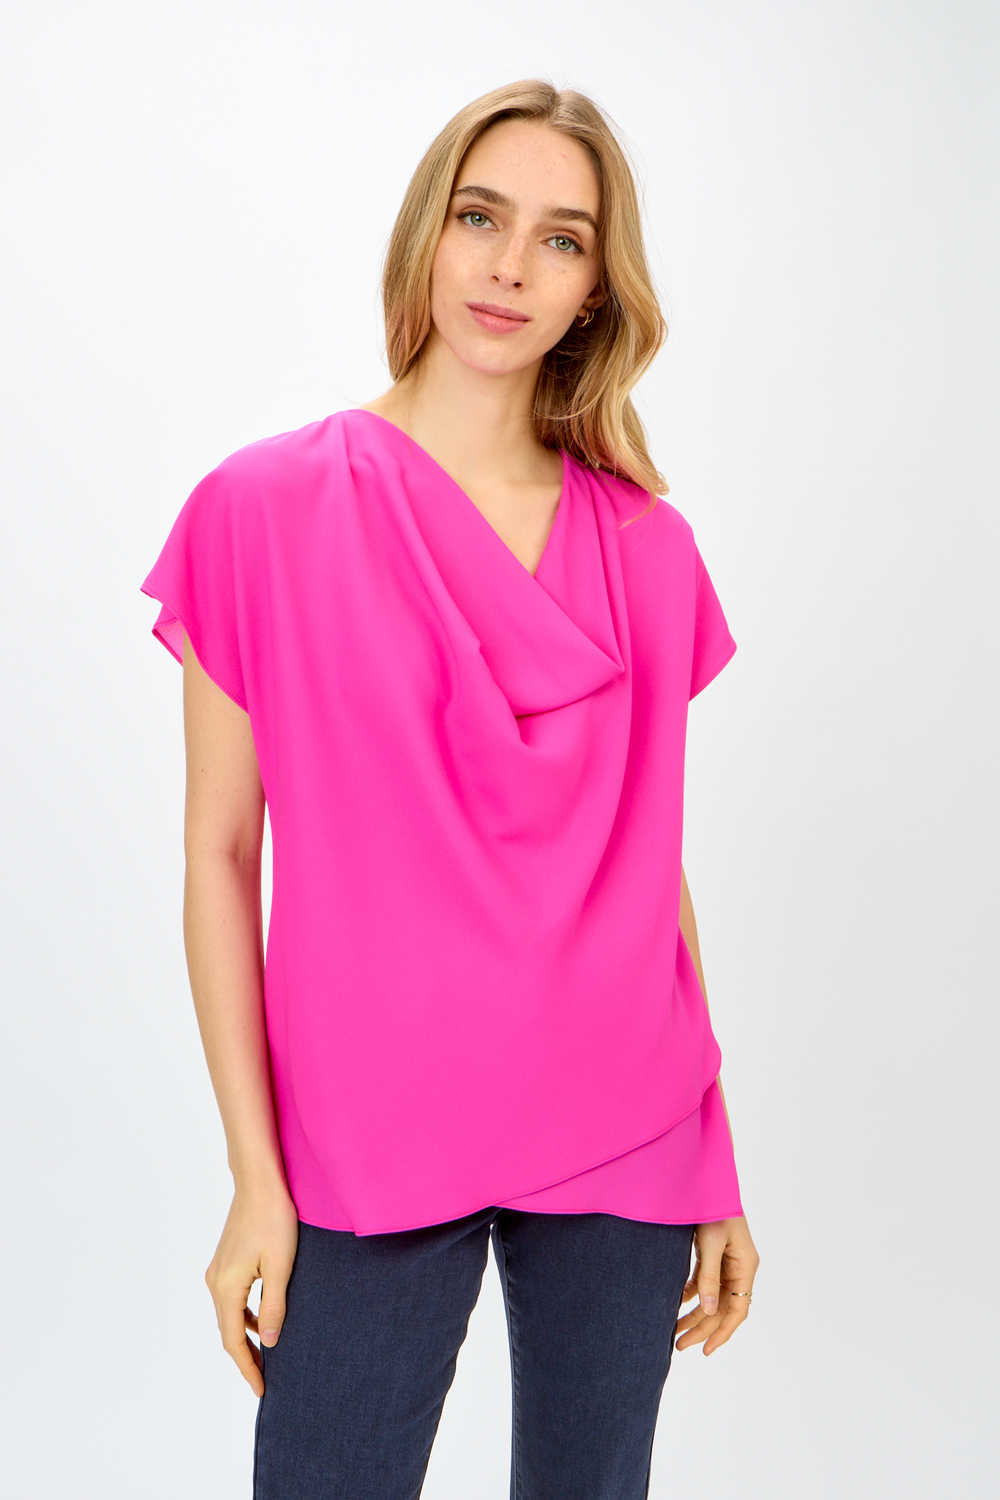 Cowl Neck Top Style 242027. Ultra Pink